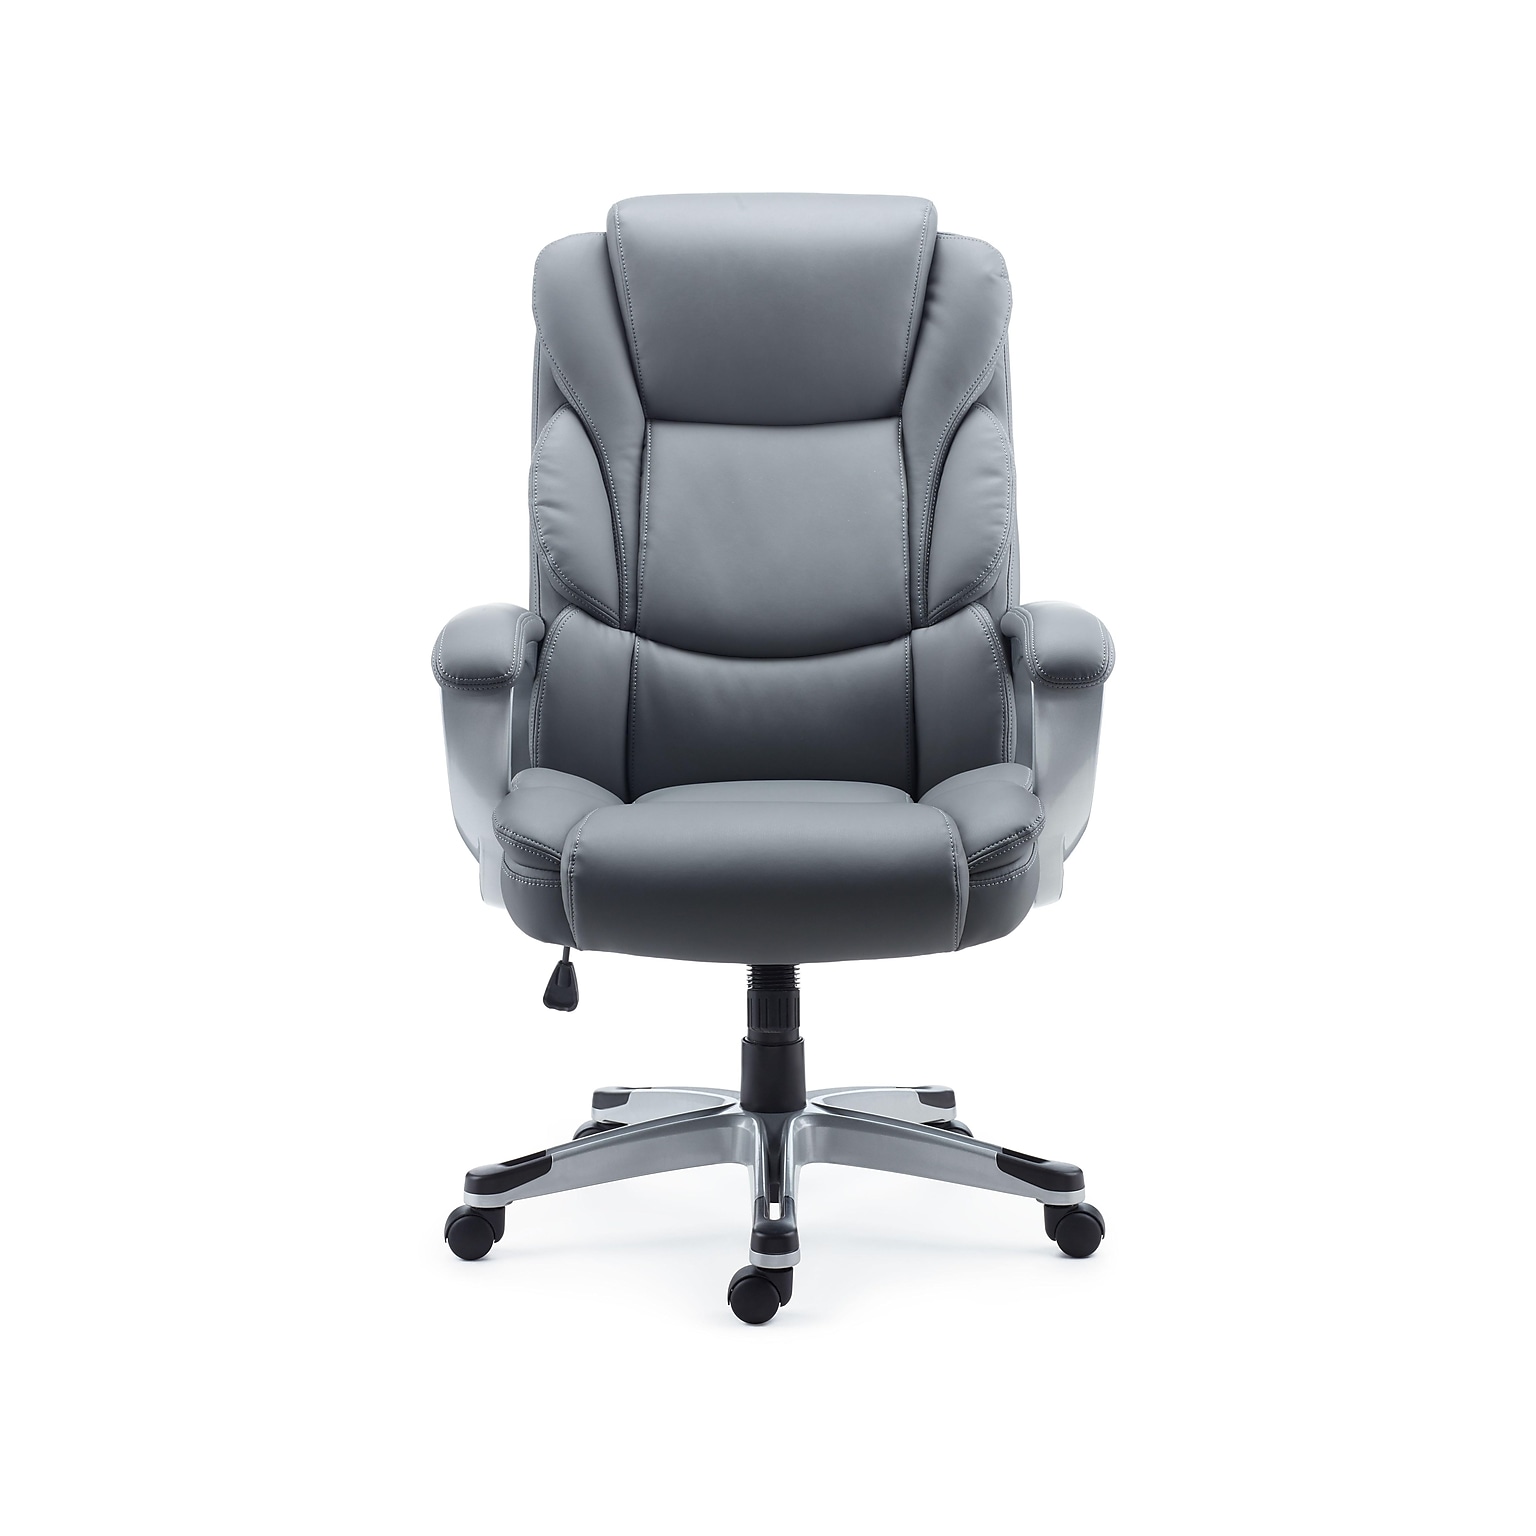 Staples Mcallum Bonded Leather Manager Chair